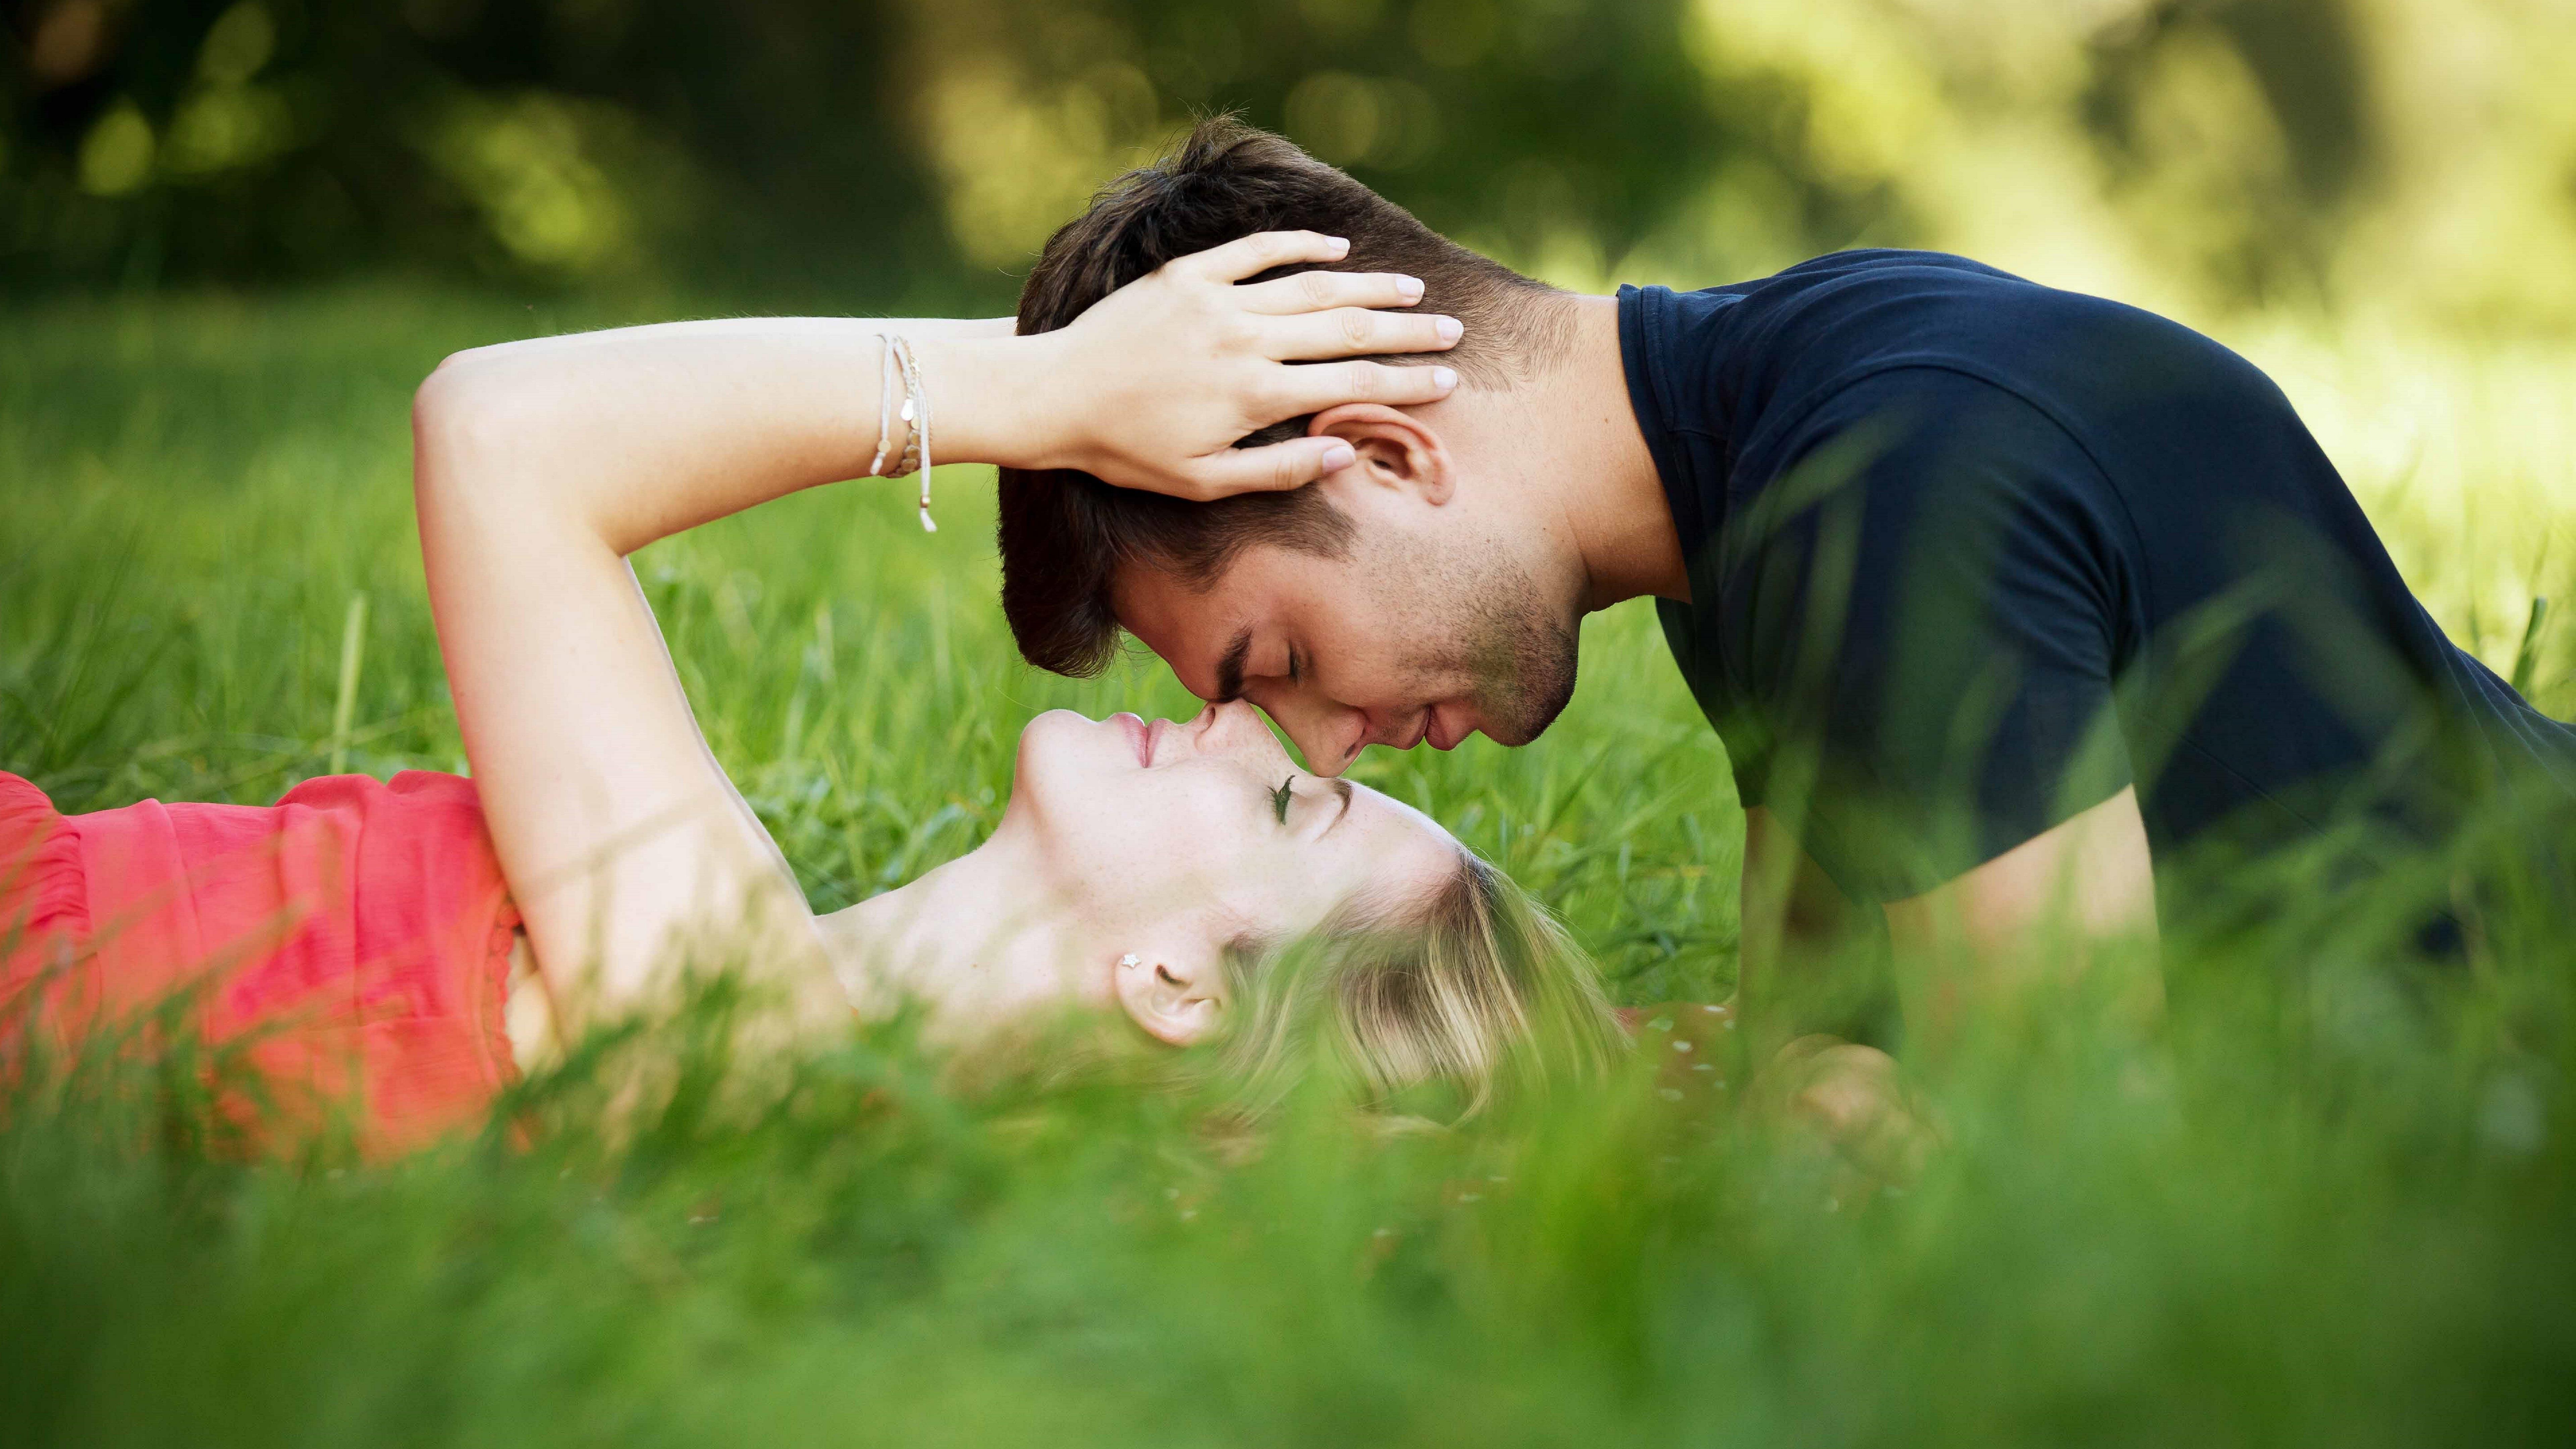 Stylish with romantic couple kiss on grass love wallpaper